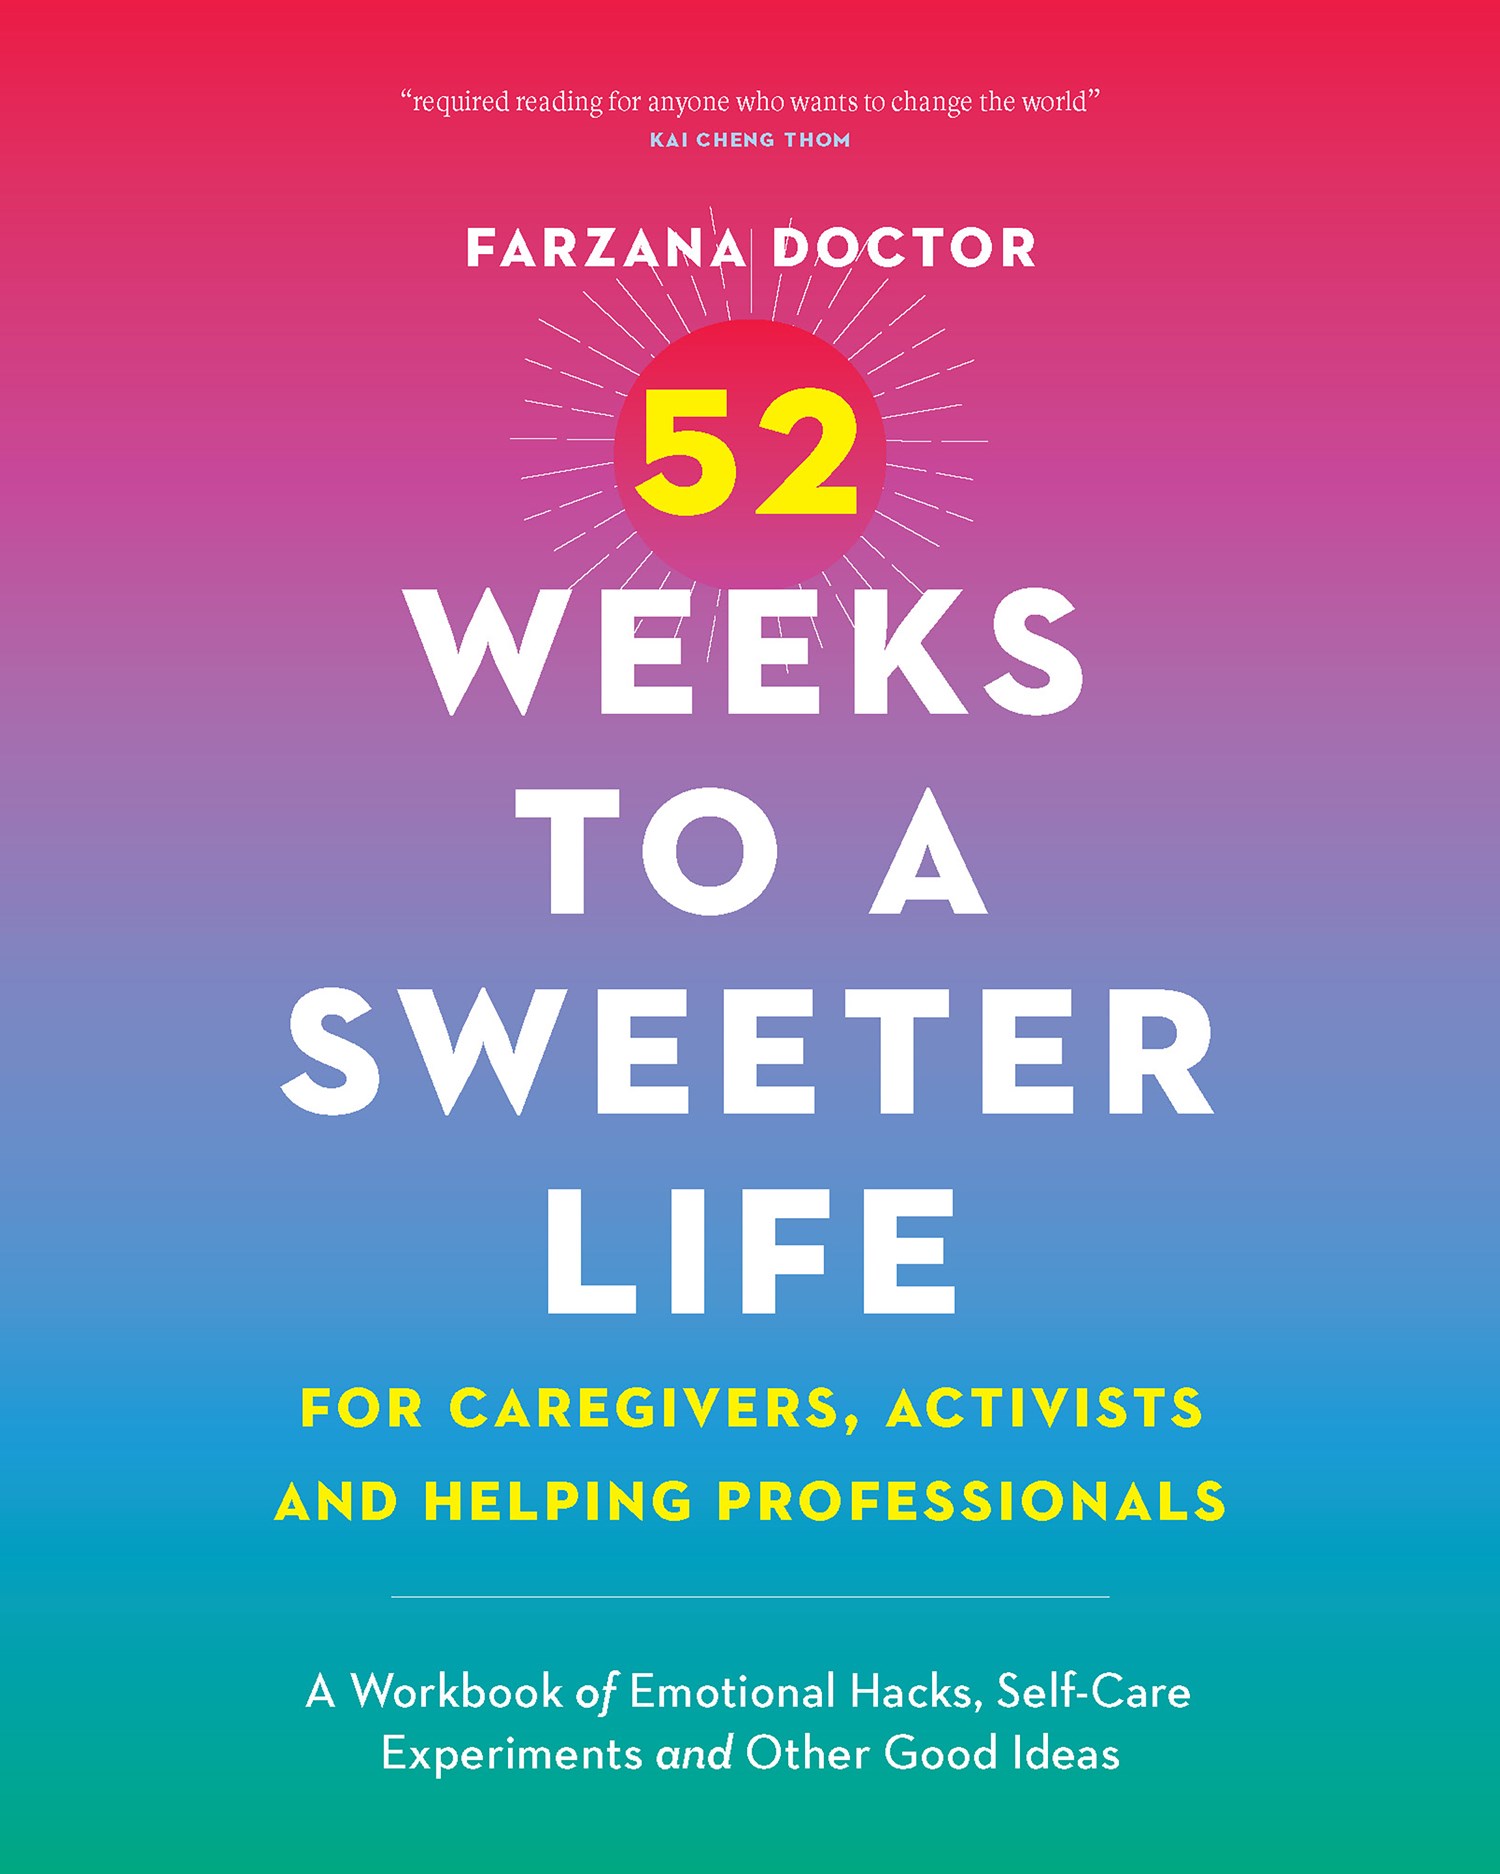 52 WEEKS TO A SWEETER LIFE FOR CAREGIVERS, ACTIVISTS AND HELPING PROFESSIONALS